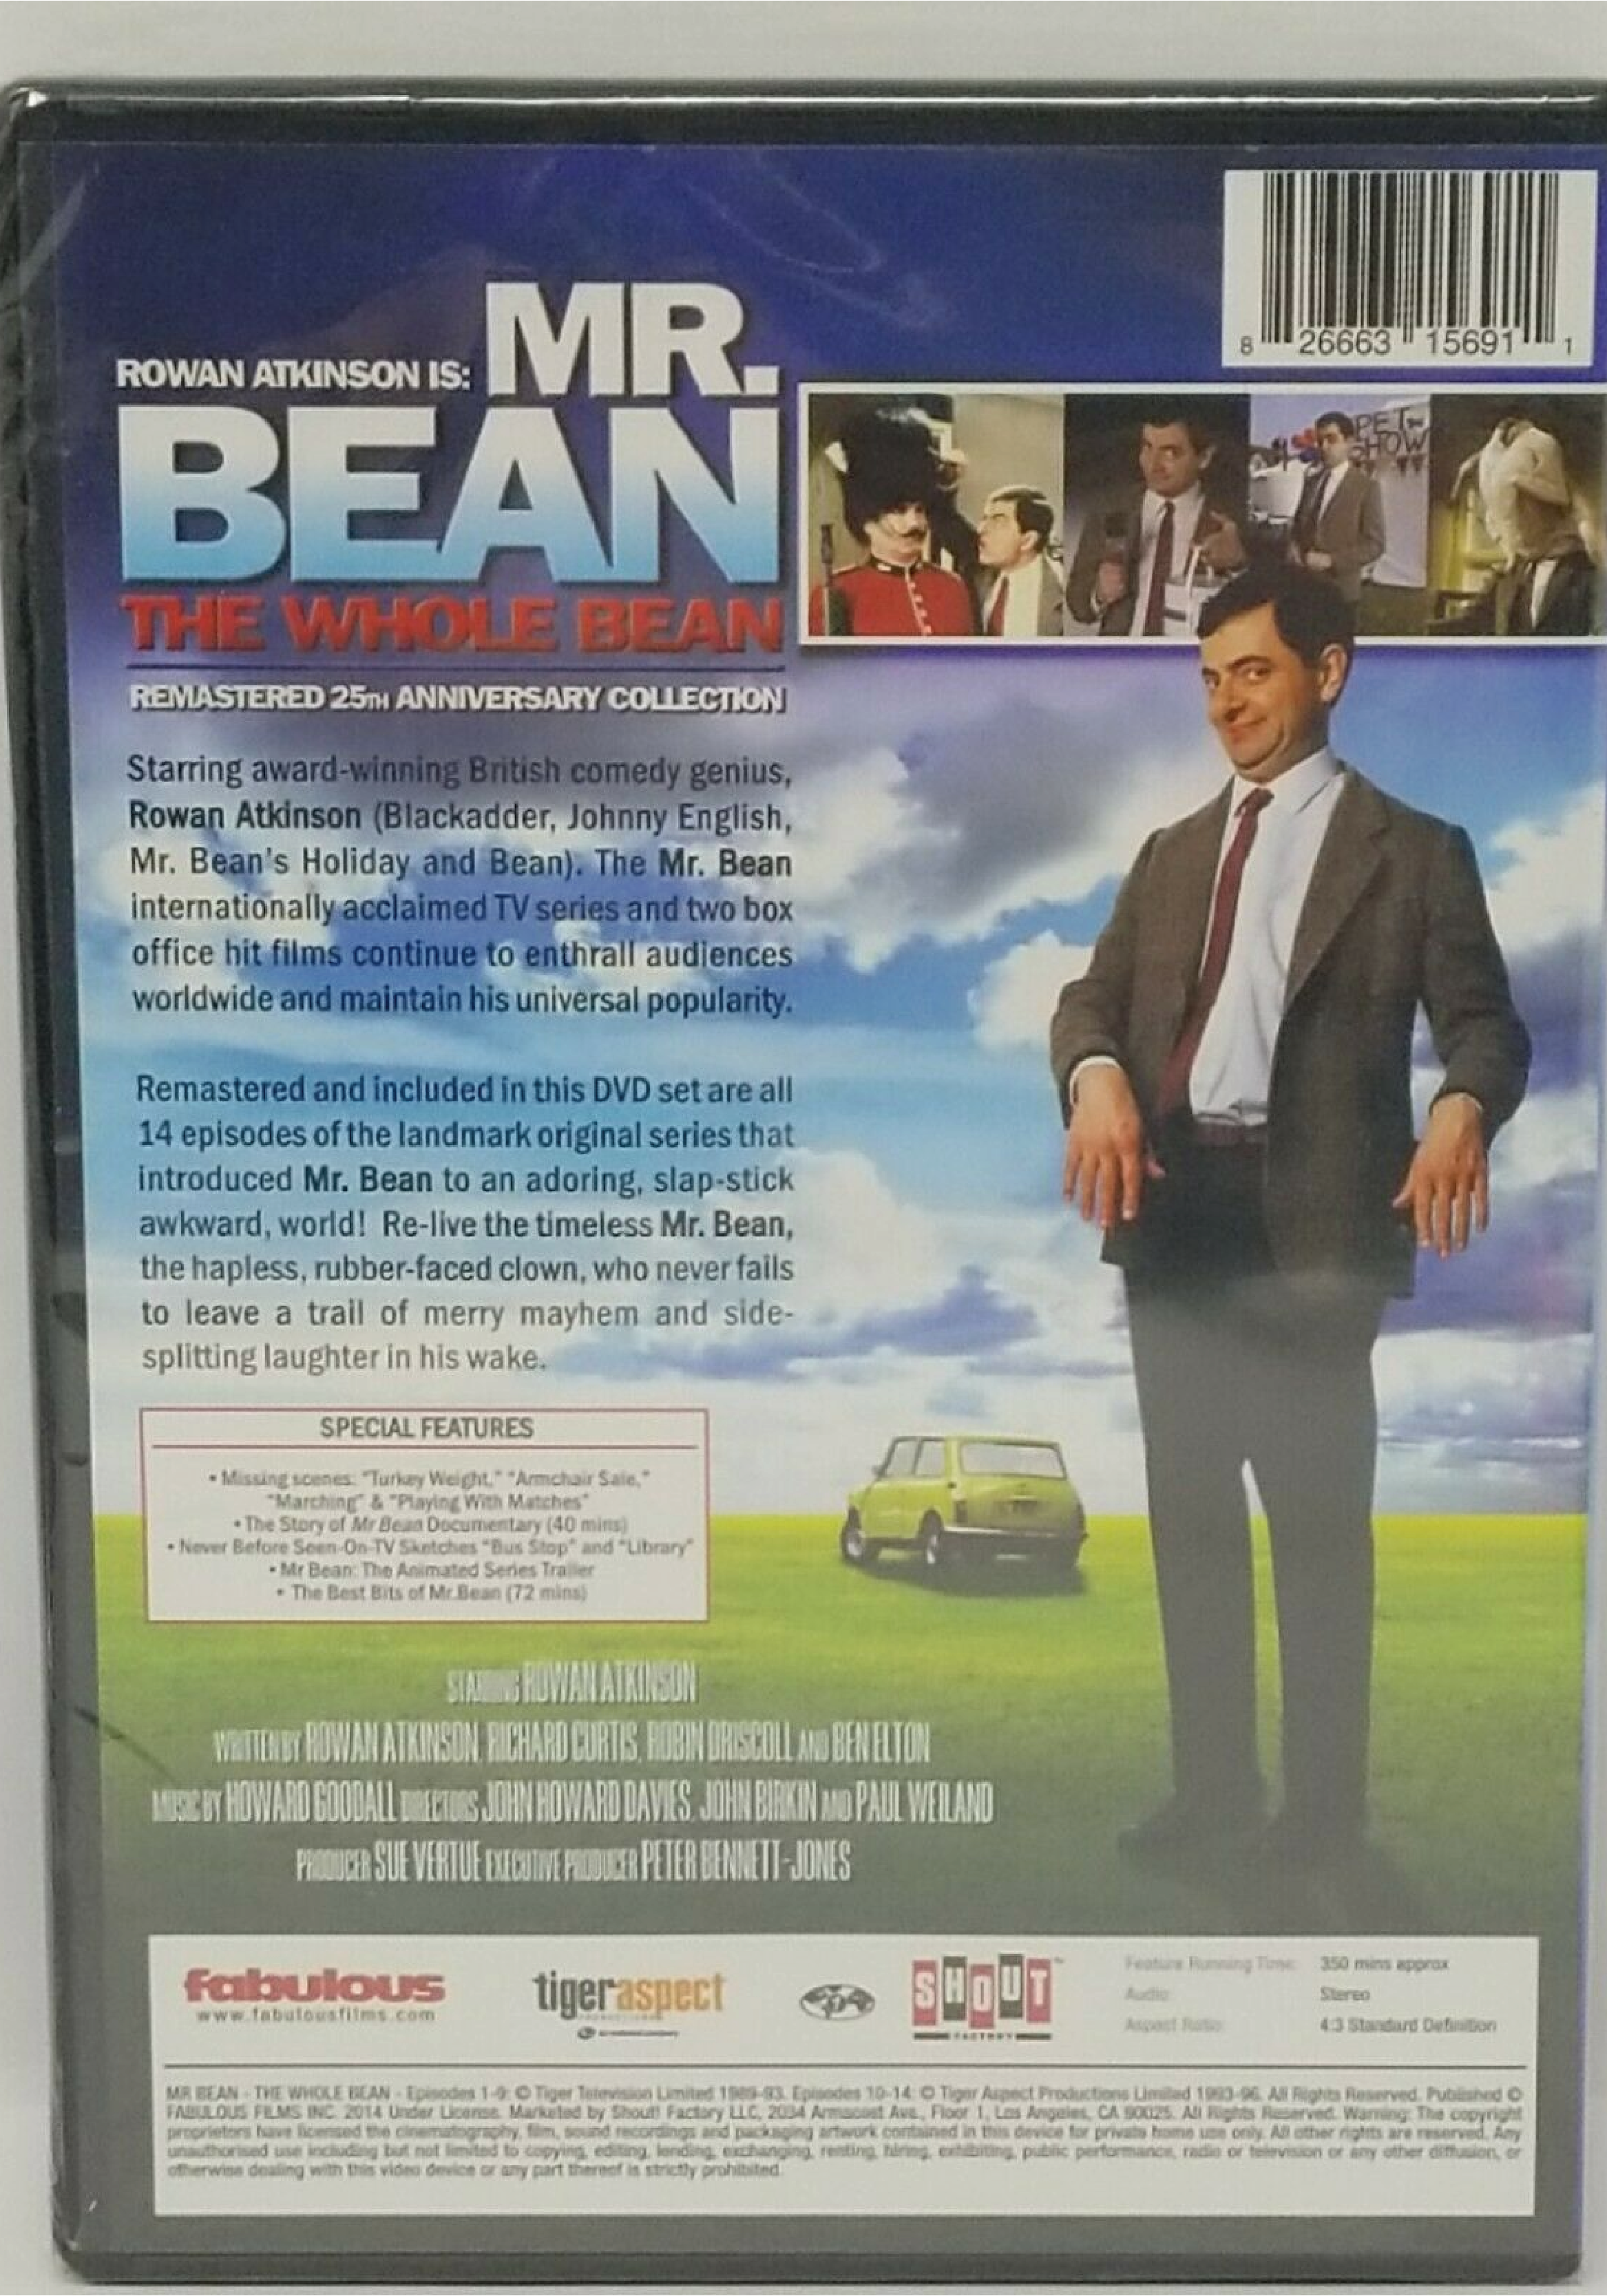 Mr. Bean: The Whole Bean (Remastered 25th Anniversary Collection